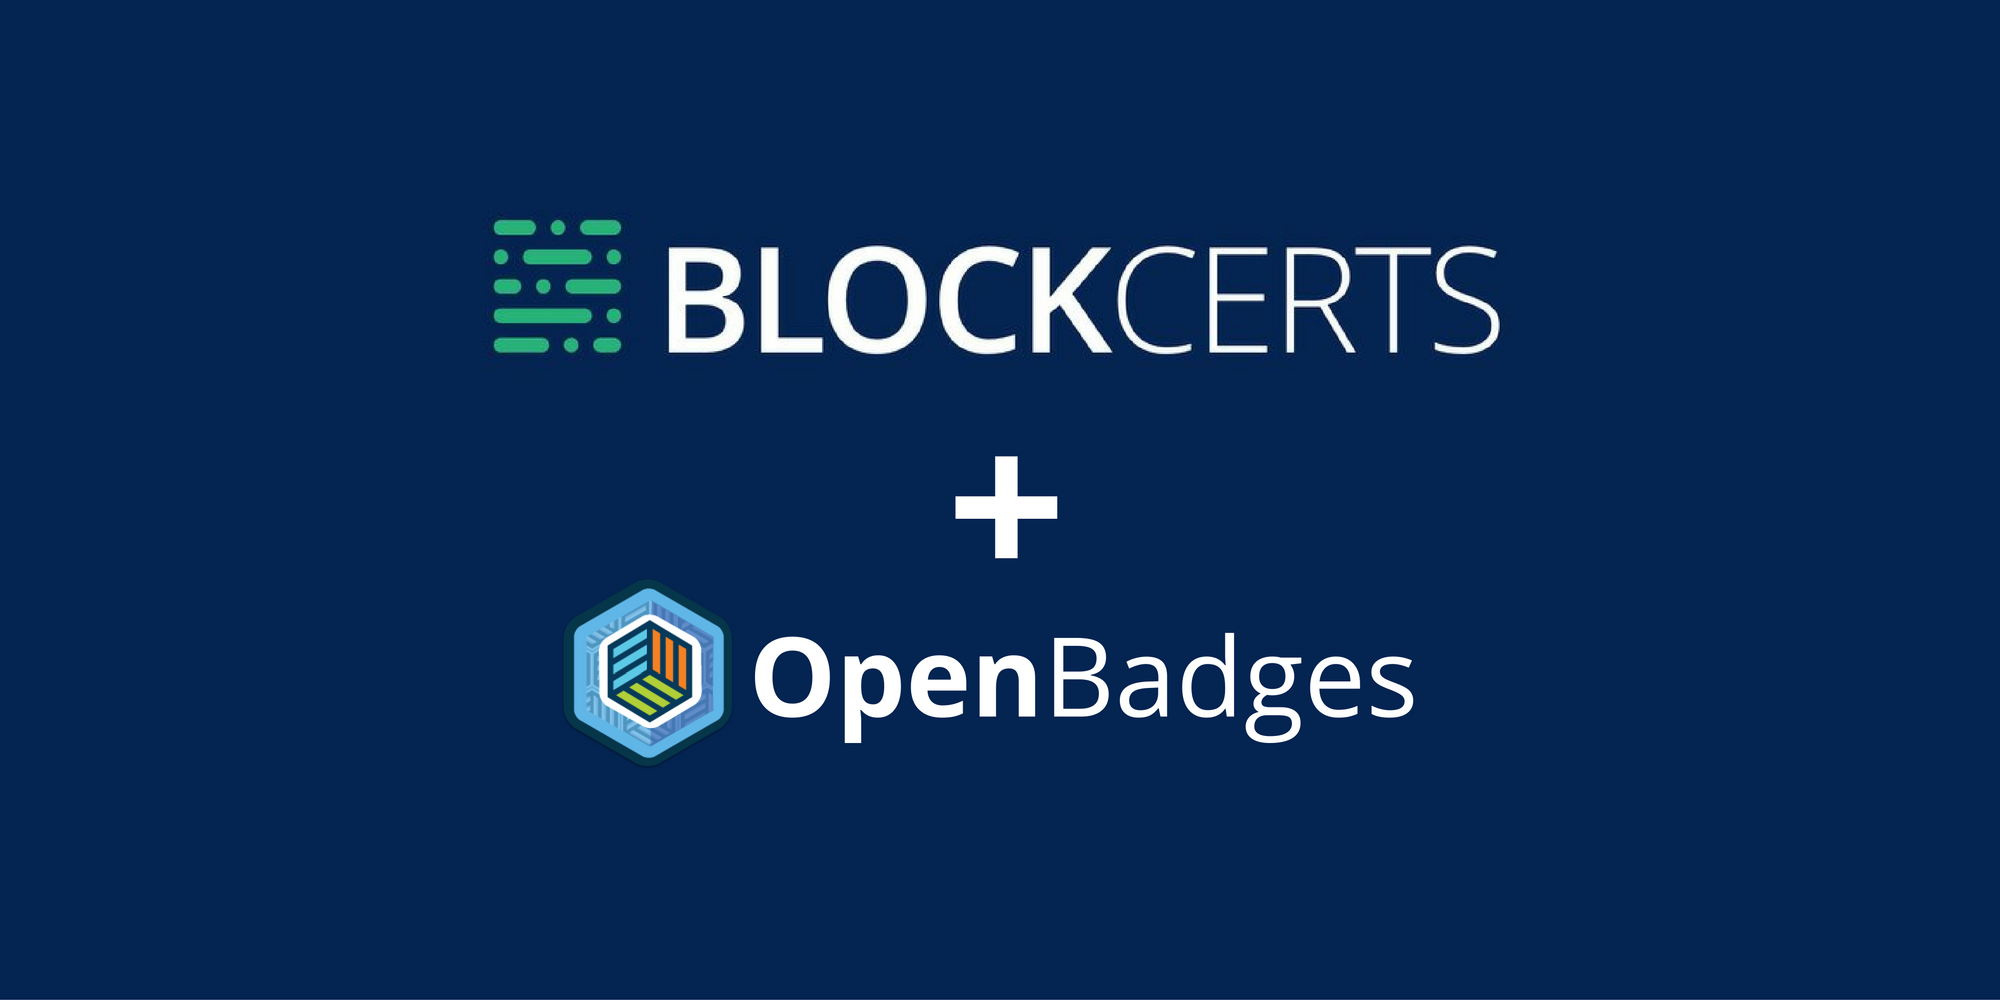 Blockcerts are friends of Open Badges